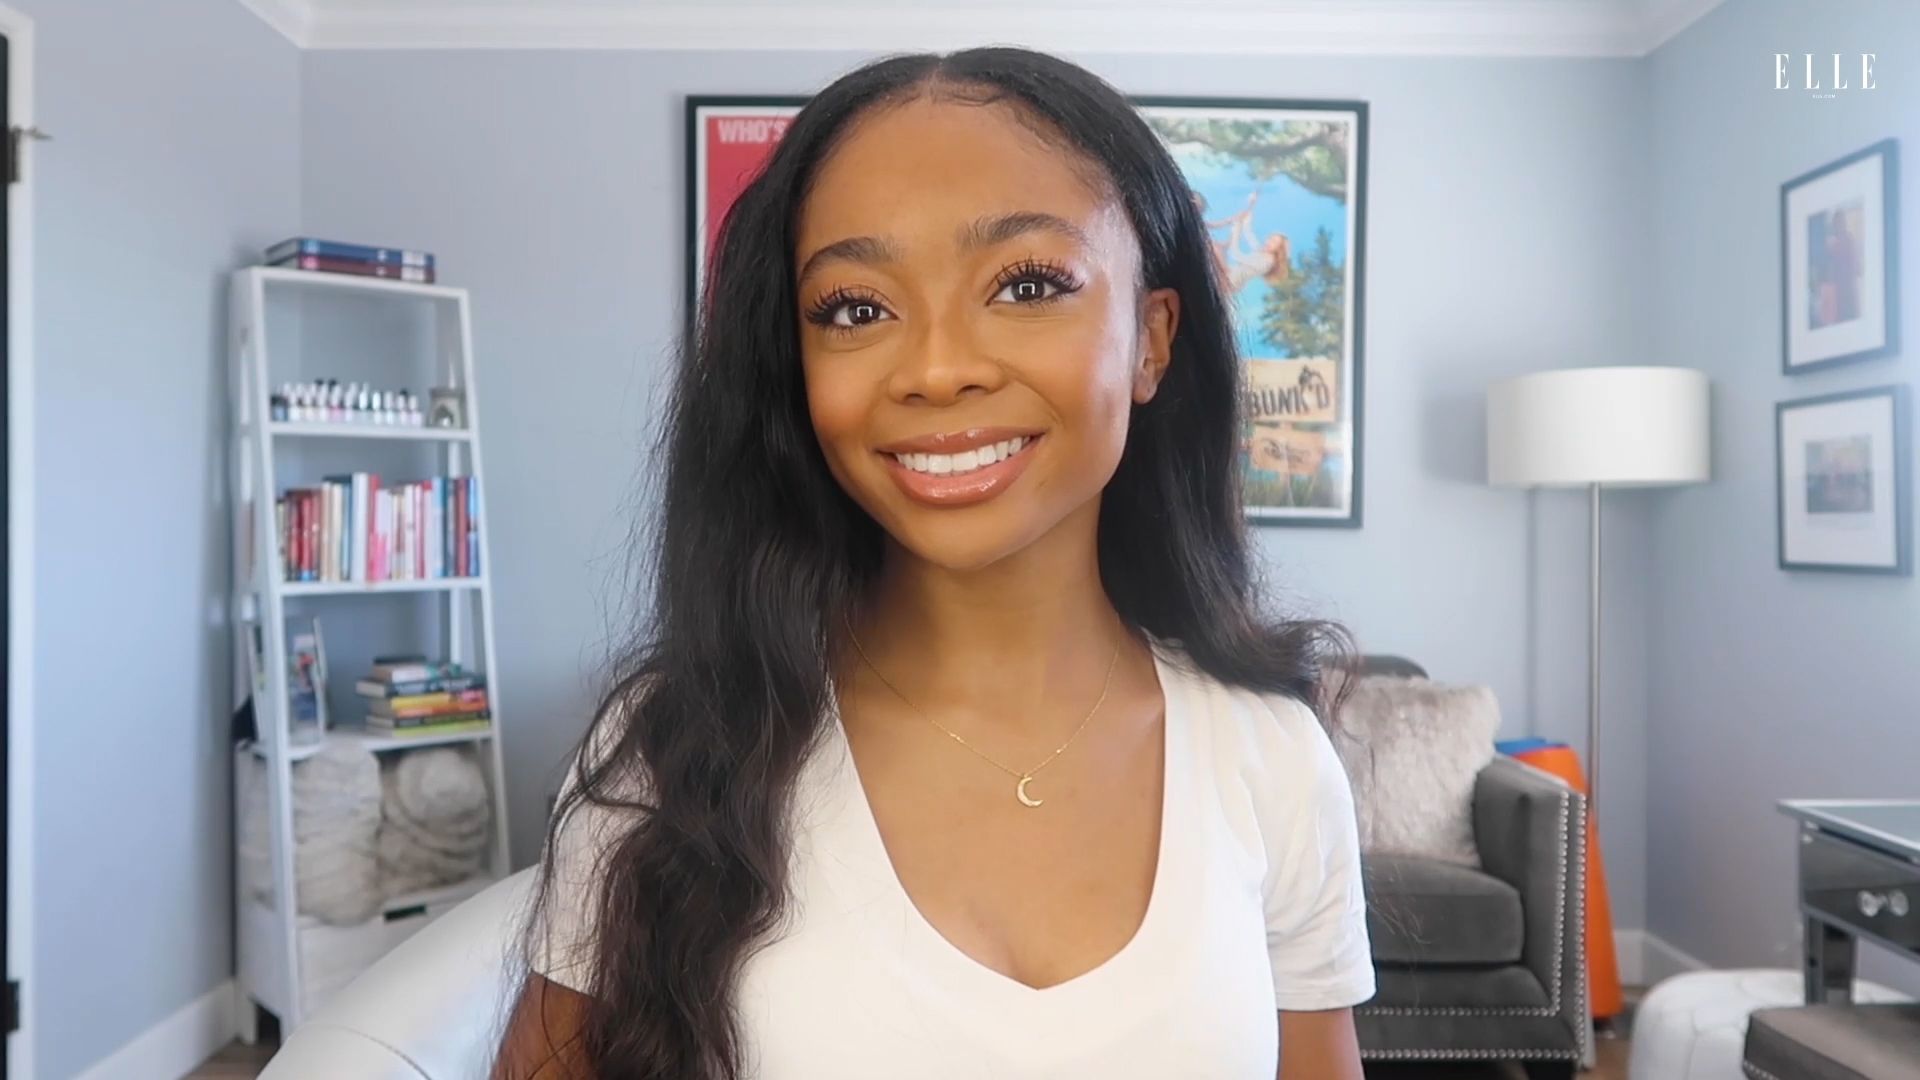 Skai Jackson Sings Lady Gaga, The Pussycat Dolls, and 50 Cent in a Game of Song Association